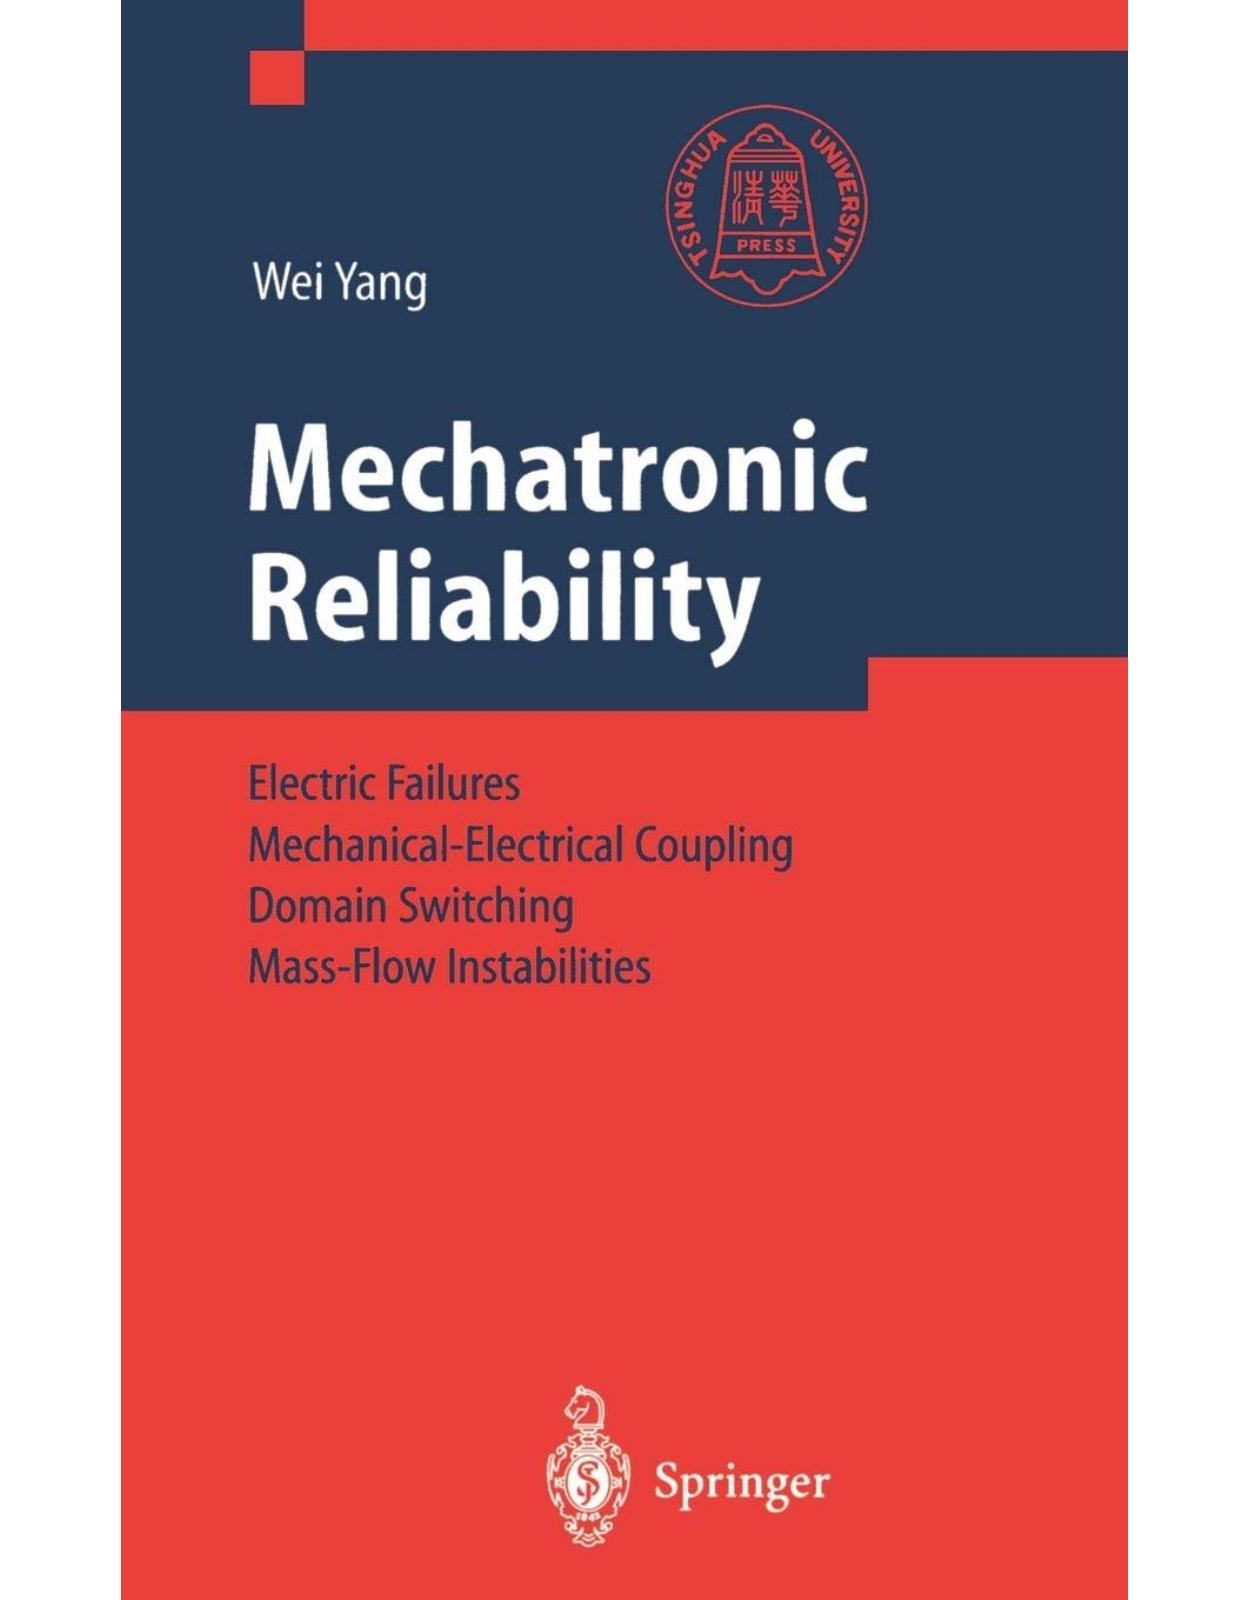 Mechatronic Reliability: Electric Failures, Mechanical-electrical Coupling, Domain Switching, Mass-flow Instabilities